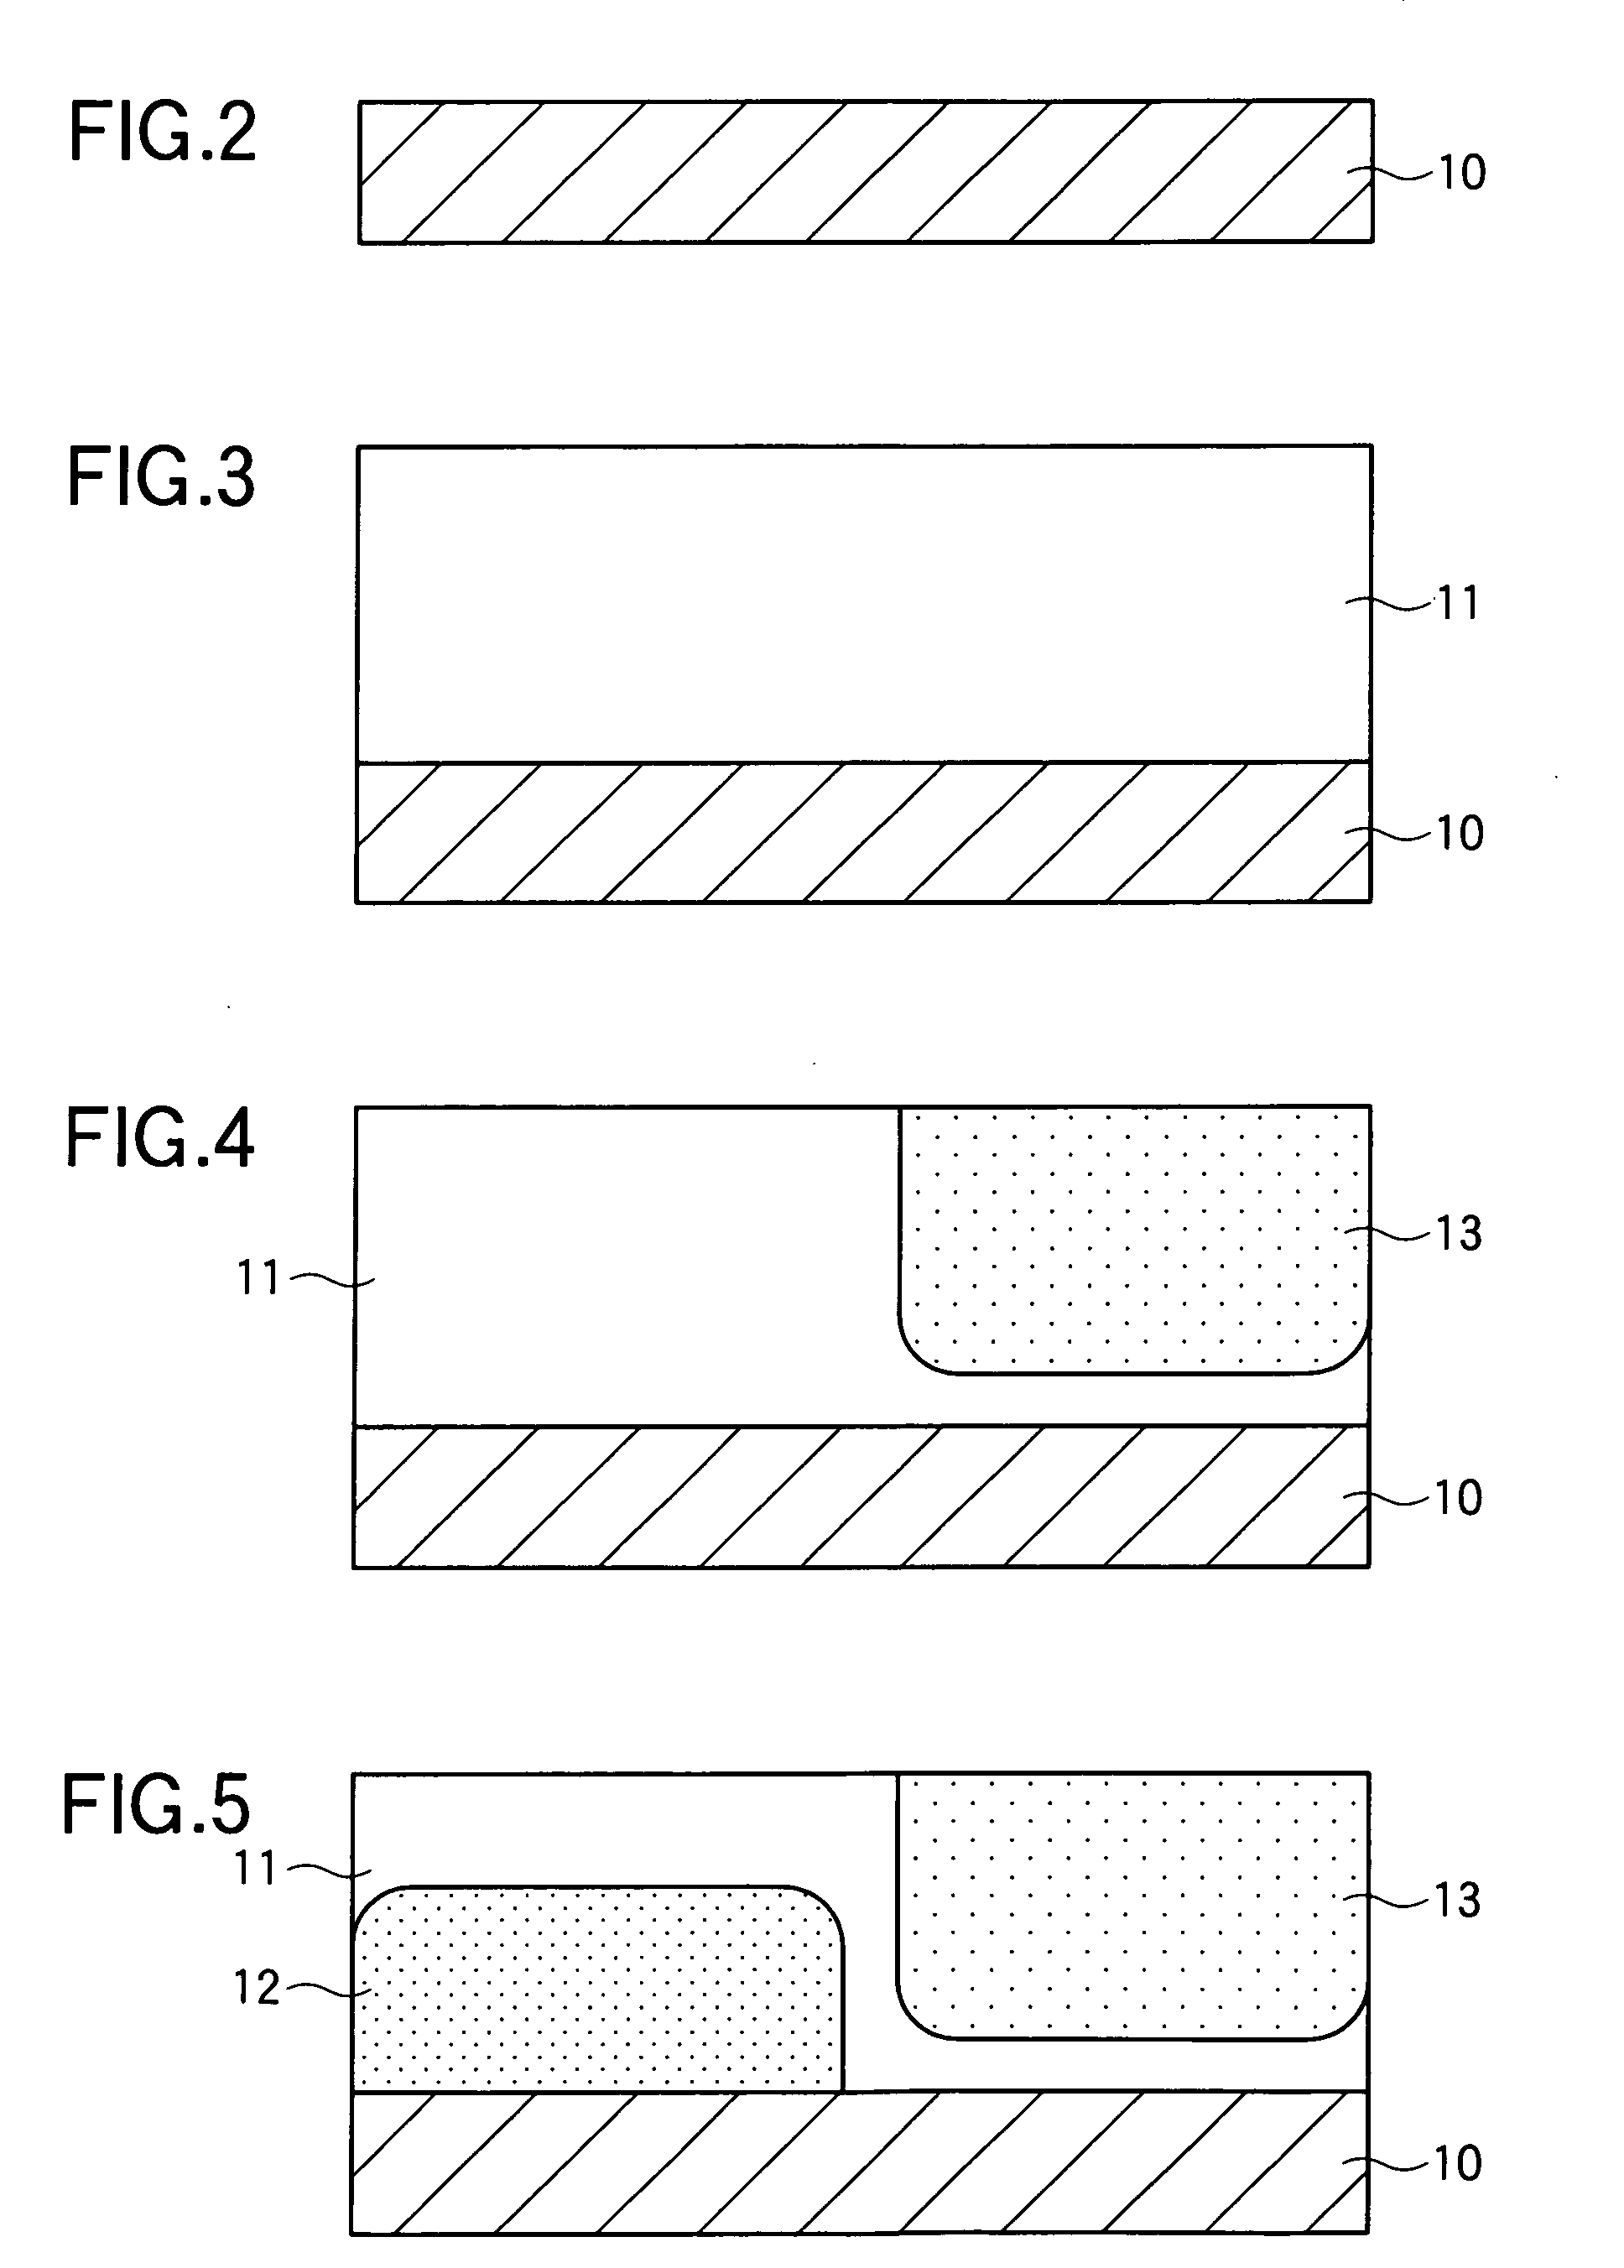 Semiconductor memory device using hot electron injection